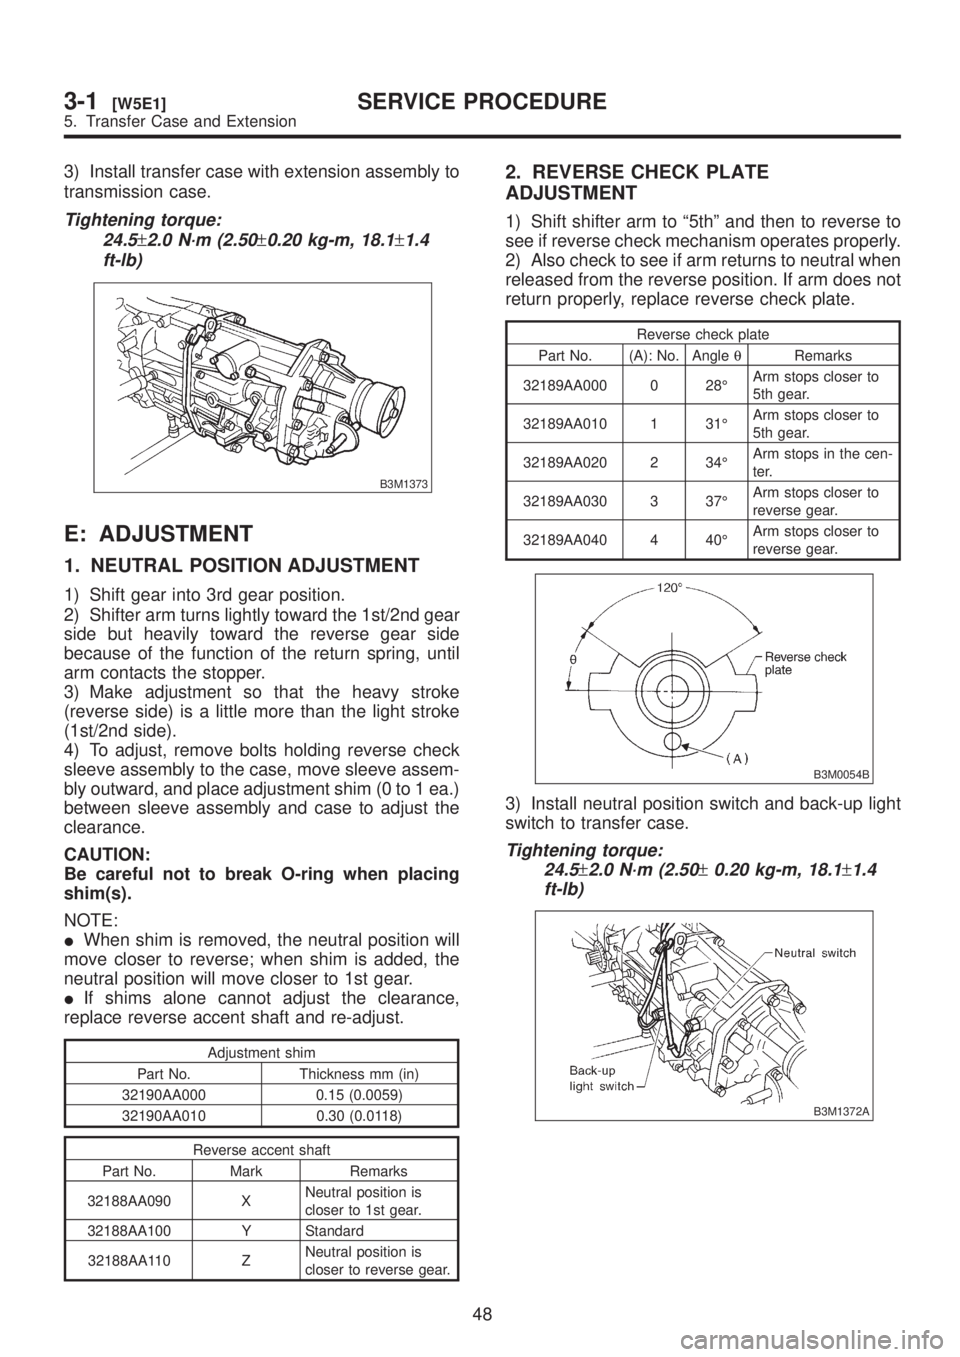 SUBARU LEGACY 1999  Service Repair Manual 3) Install transfer case with extension assembly to
transmission case.
Tightening torque:
24.5
±2.0 N´m (2.50±0.20 kg-m, 18.1±1.4
ft-lb)
B3M1373
E: ADJUSTMENT
1. NEUTRAL POSITION ADJUSTMENT
1) Shi